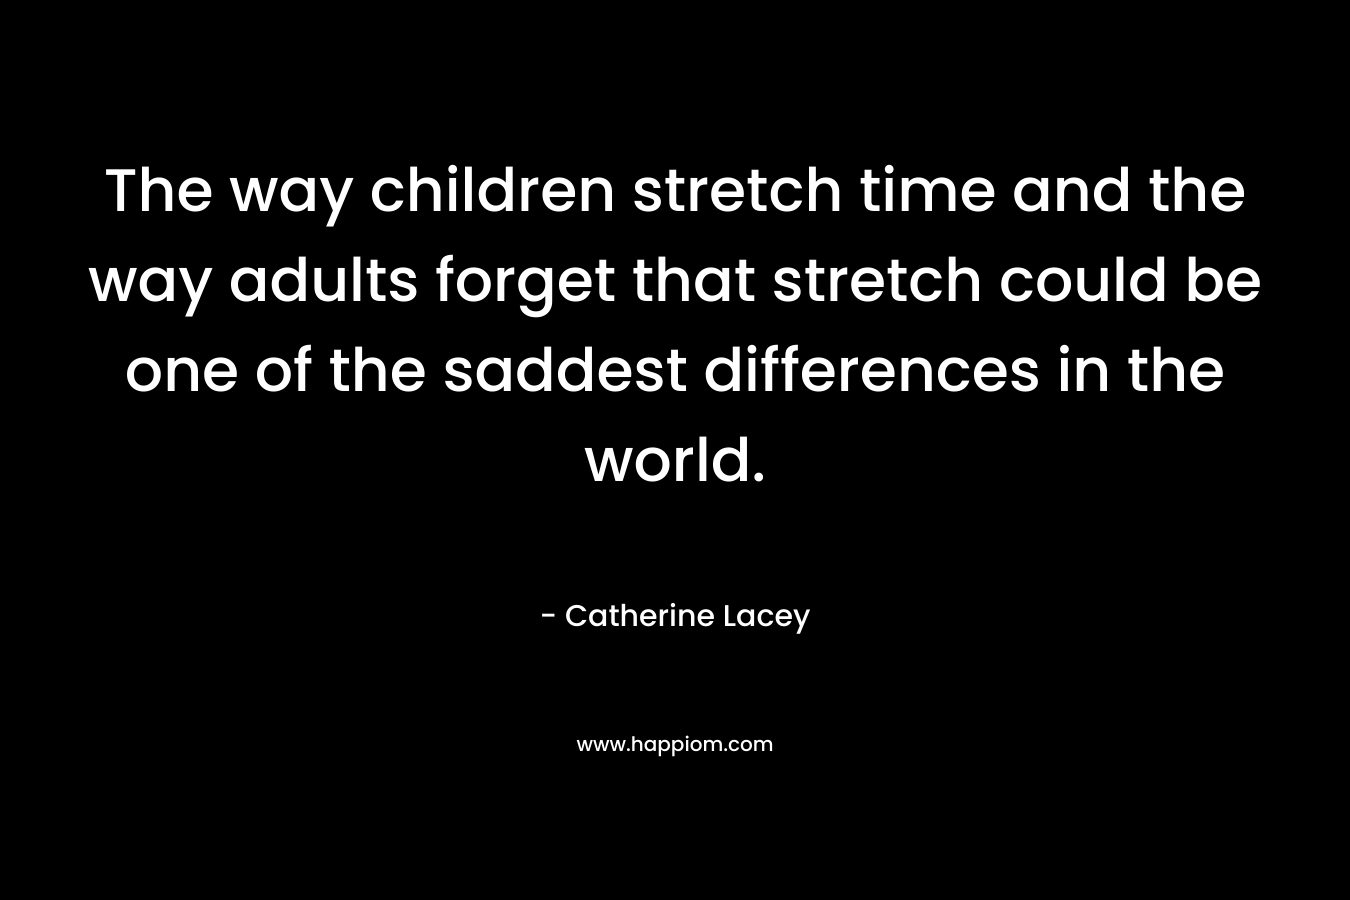 The way children stretch time and the way adults forget that stretch could be one of the saddest differences in the world.